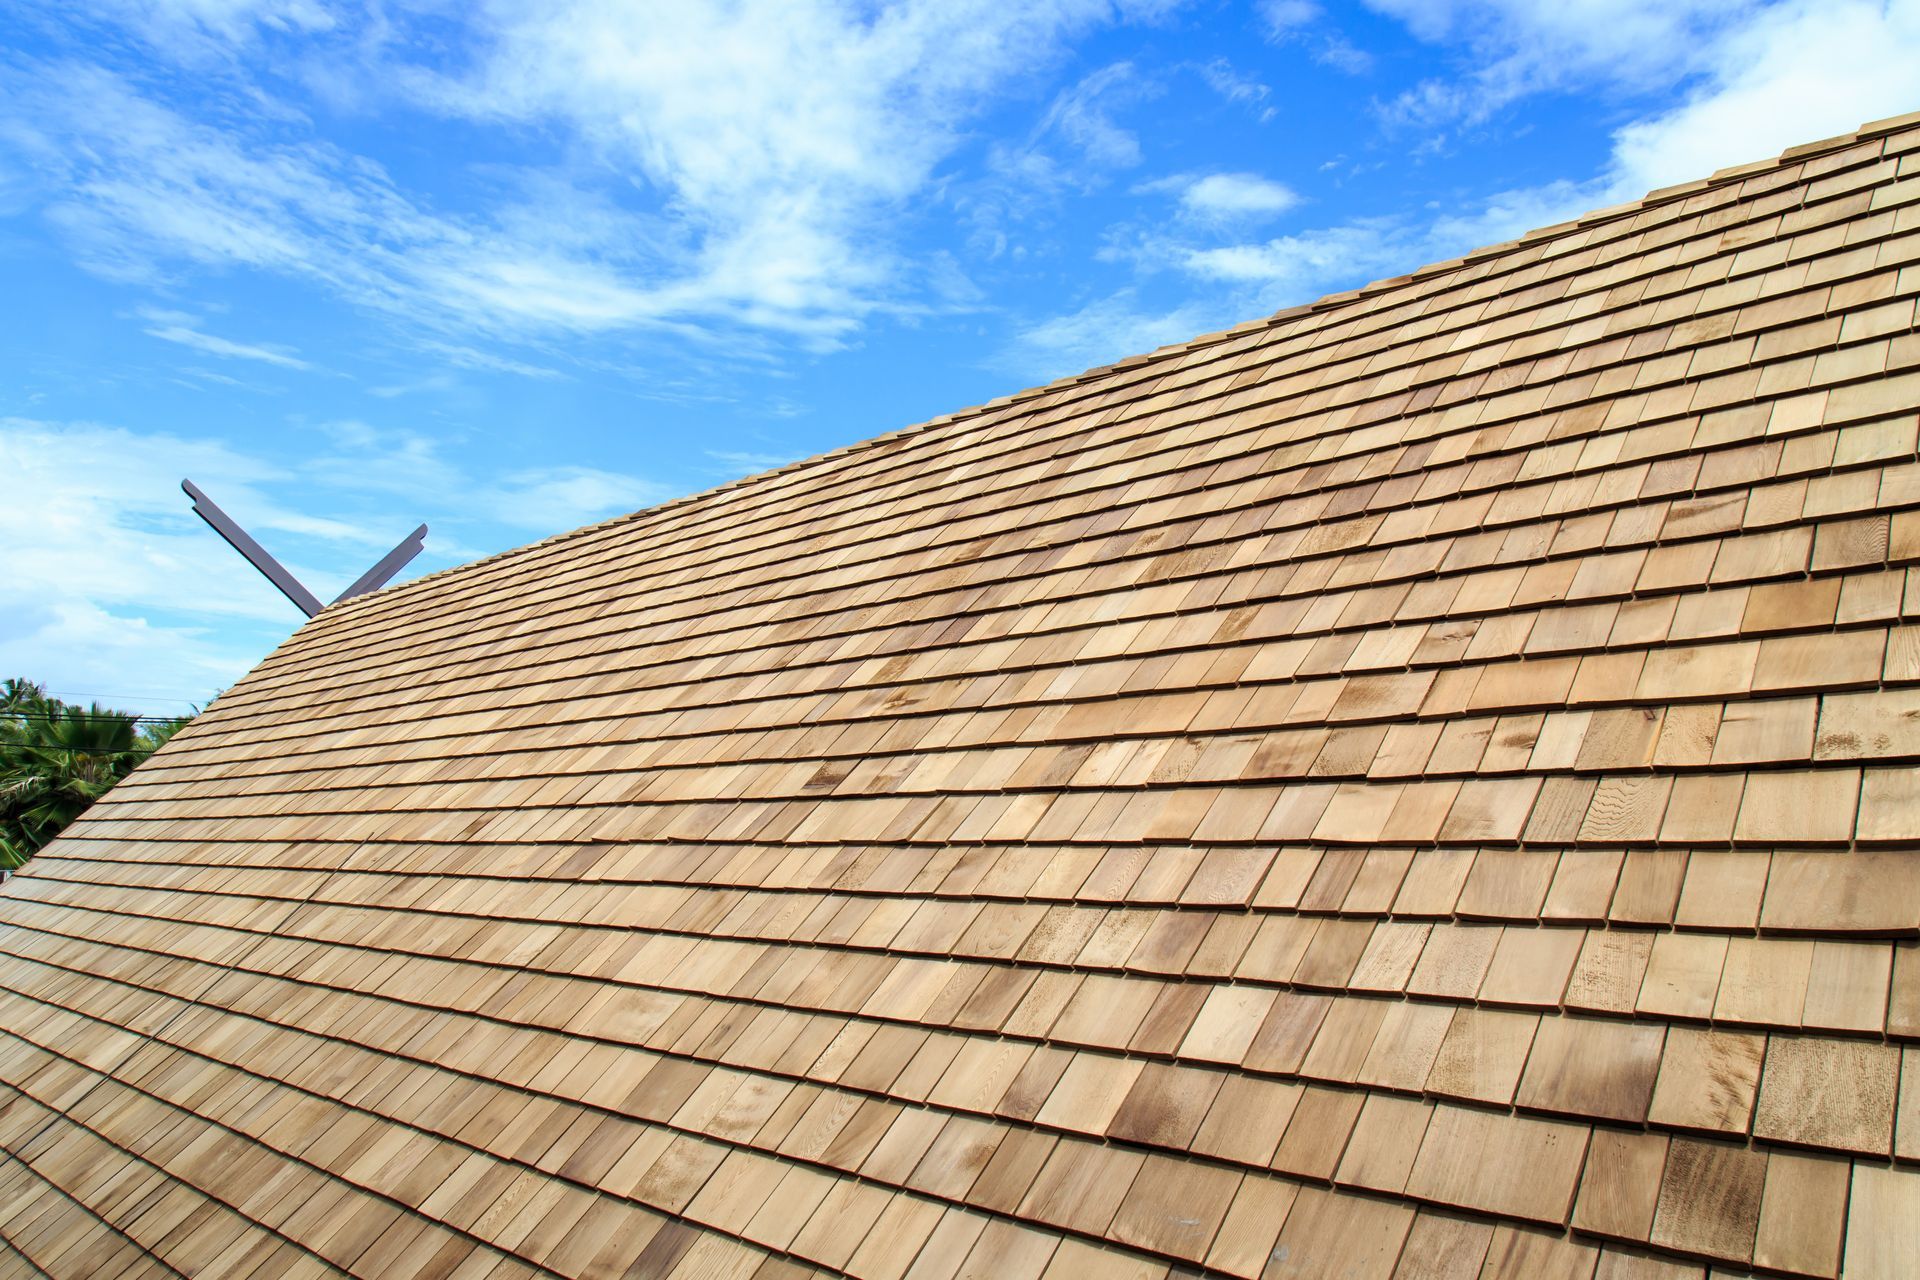 Close-up view of a wooden roof shingle texture, showcasing natural wood grain patterns and varying shades.